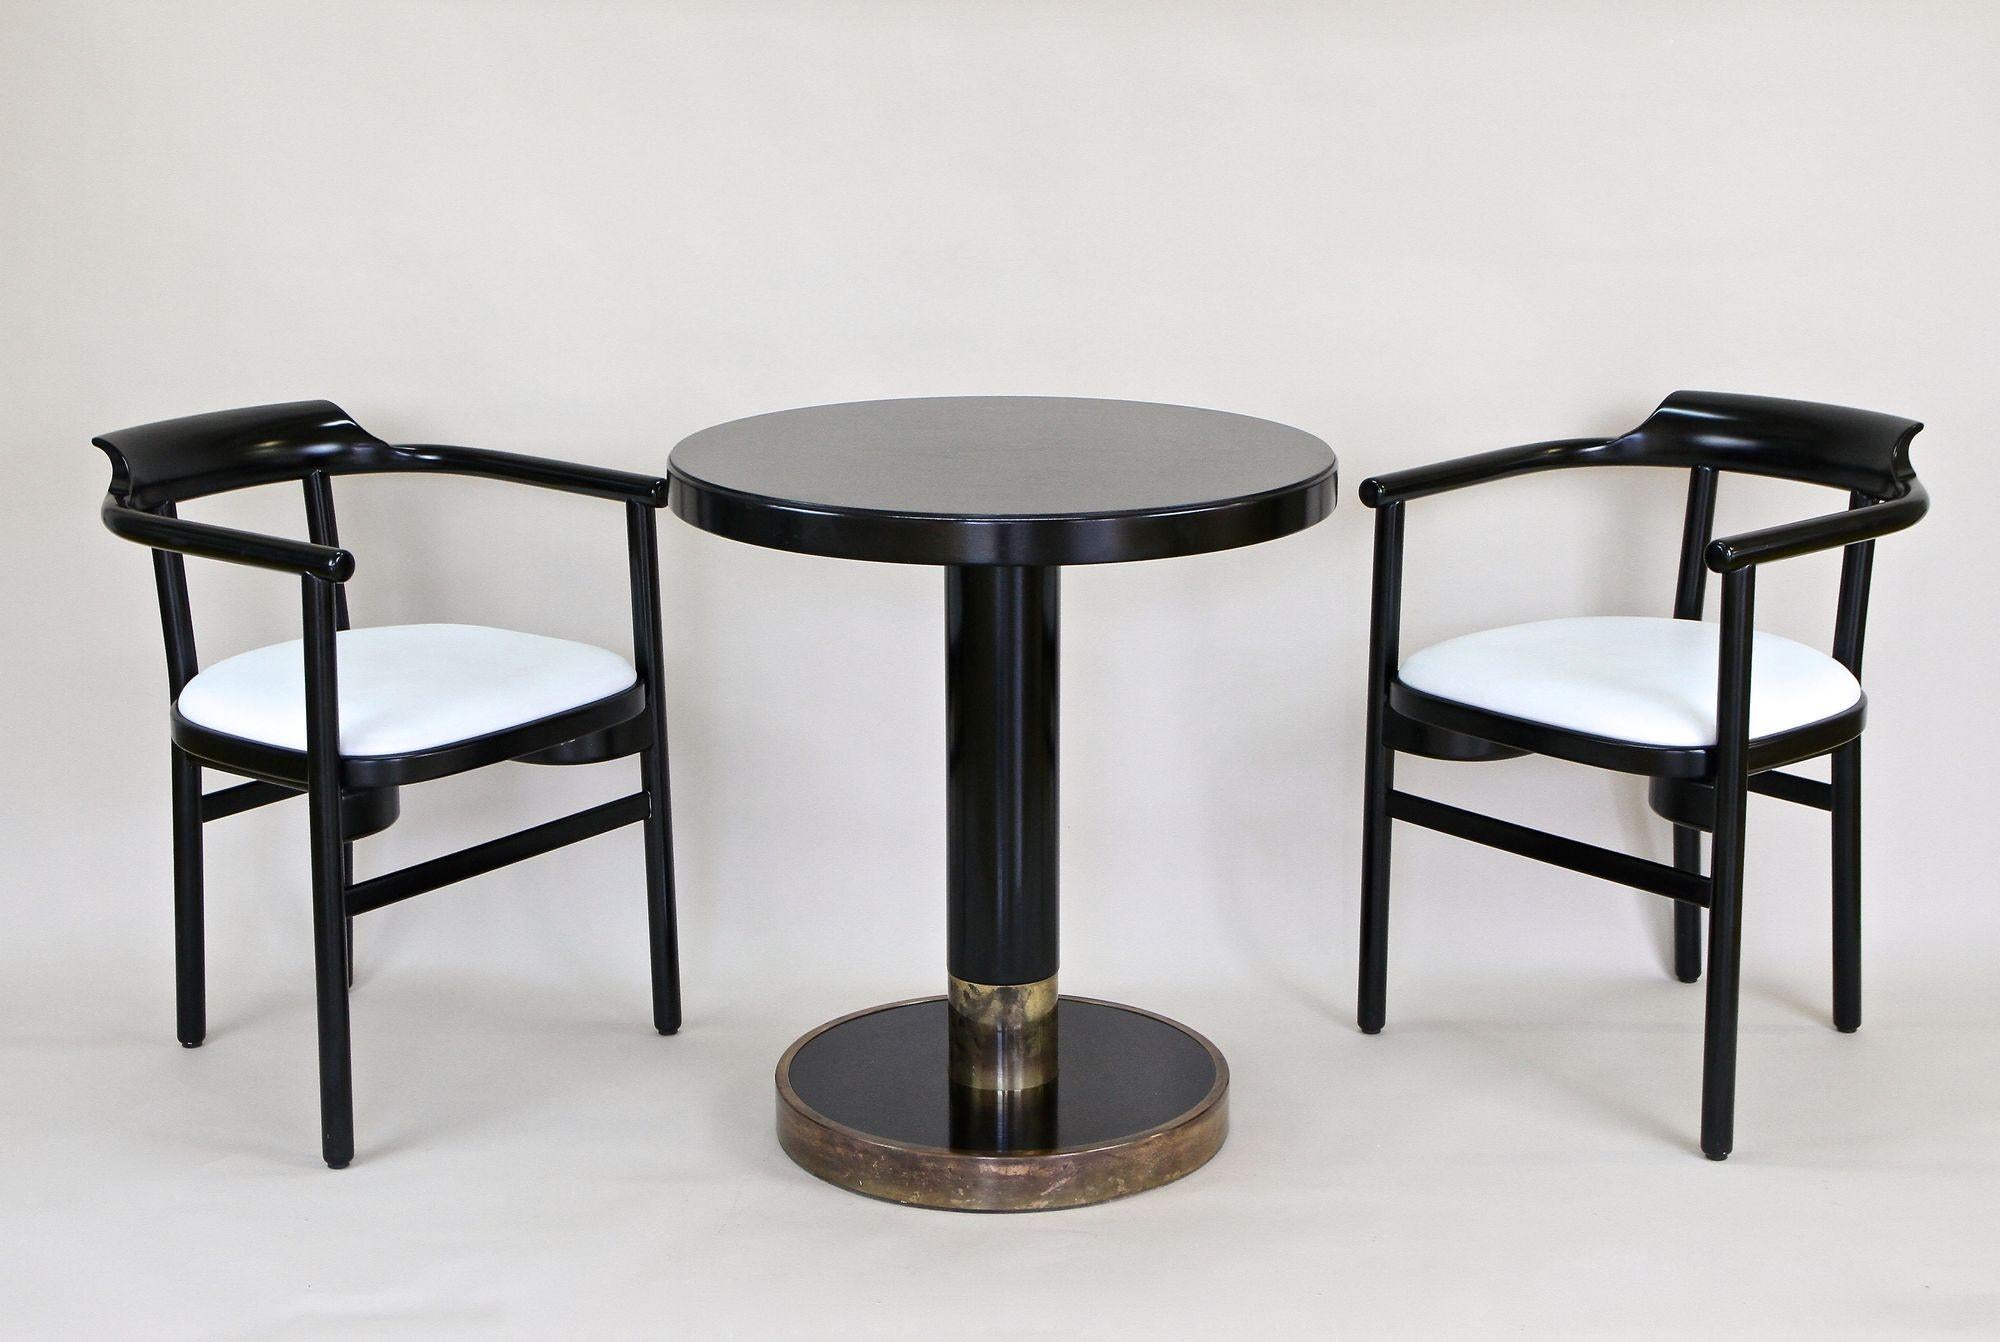 Timeless late 20th century black round coffee table made by the well known company of Thonet Vienna in Austria. Attributed to the design of past epoch - the Art Nouveau period - this fine beechwood table from around 1980 comes with a black lacquered